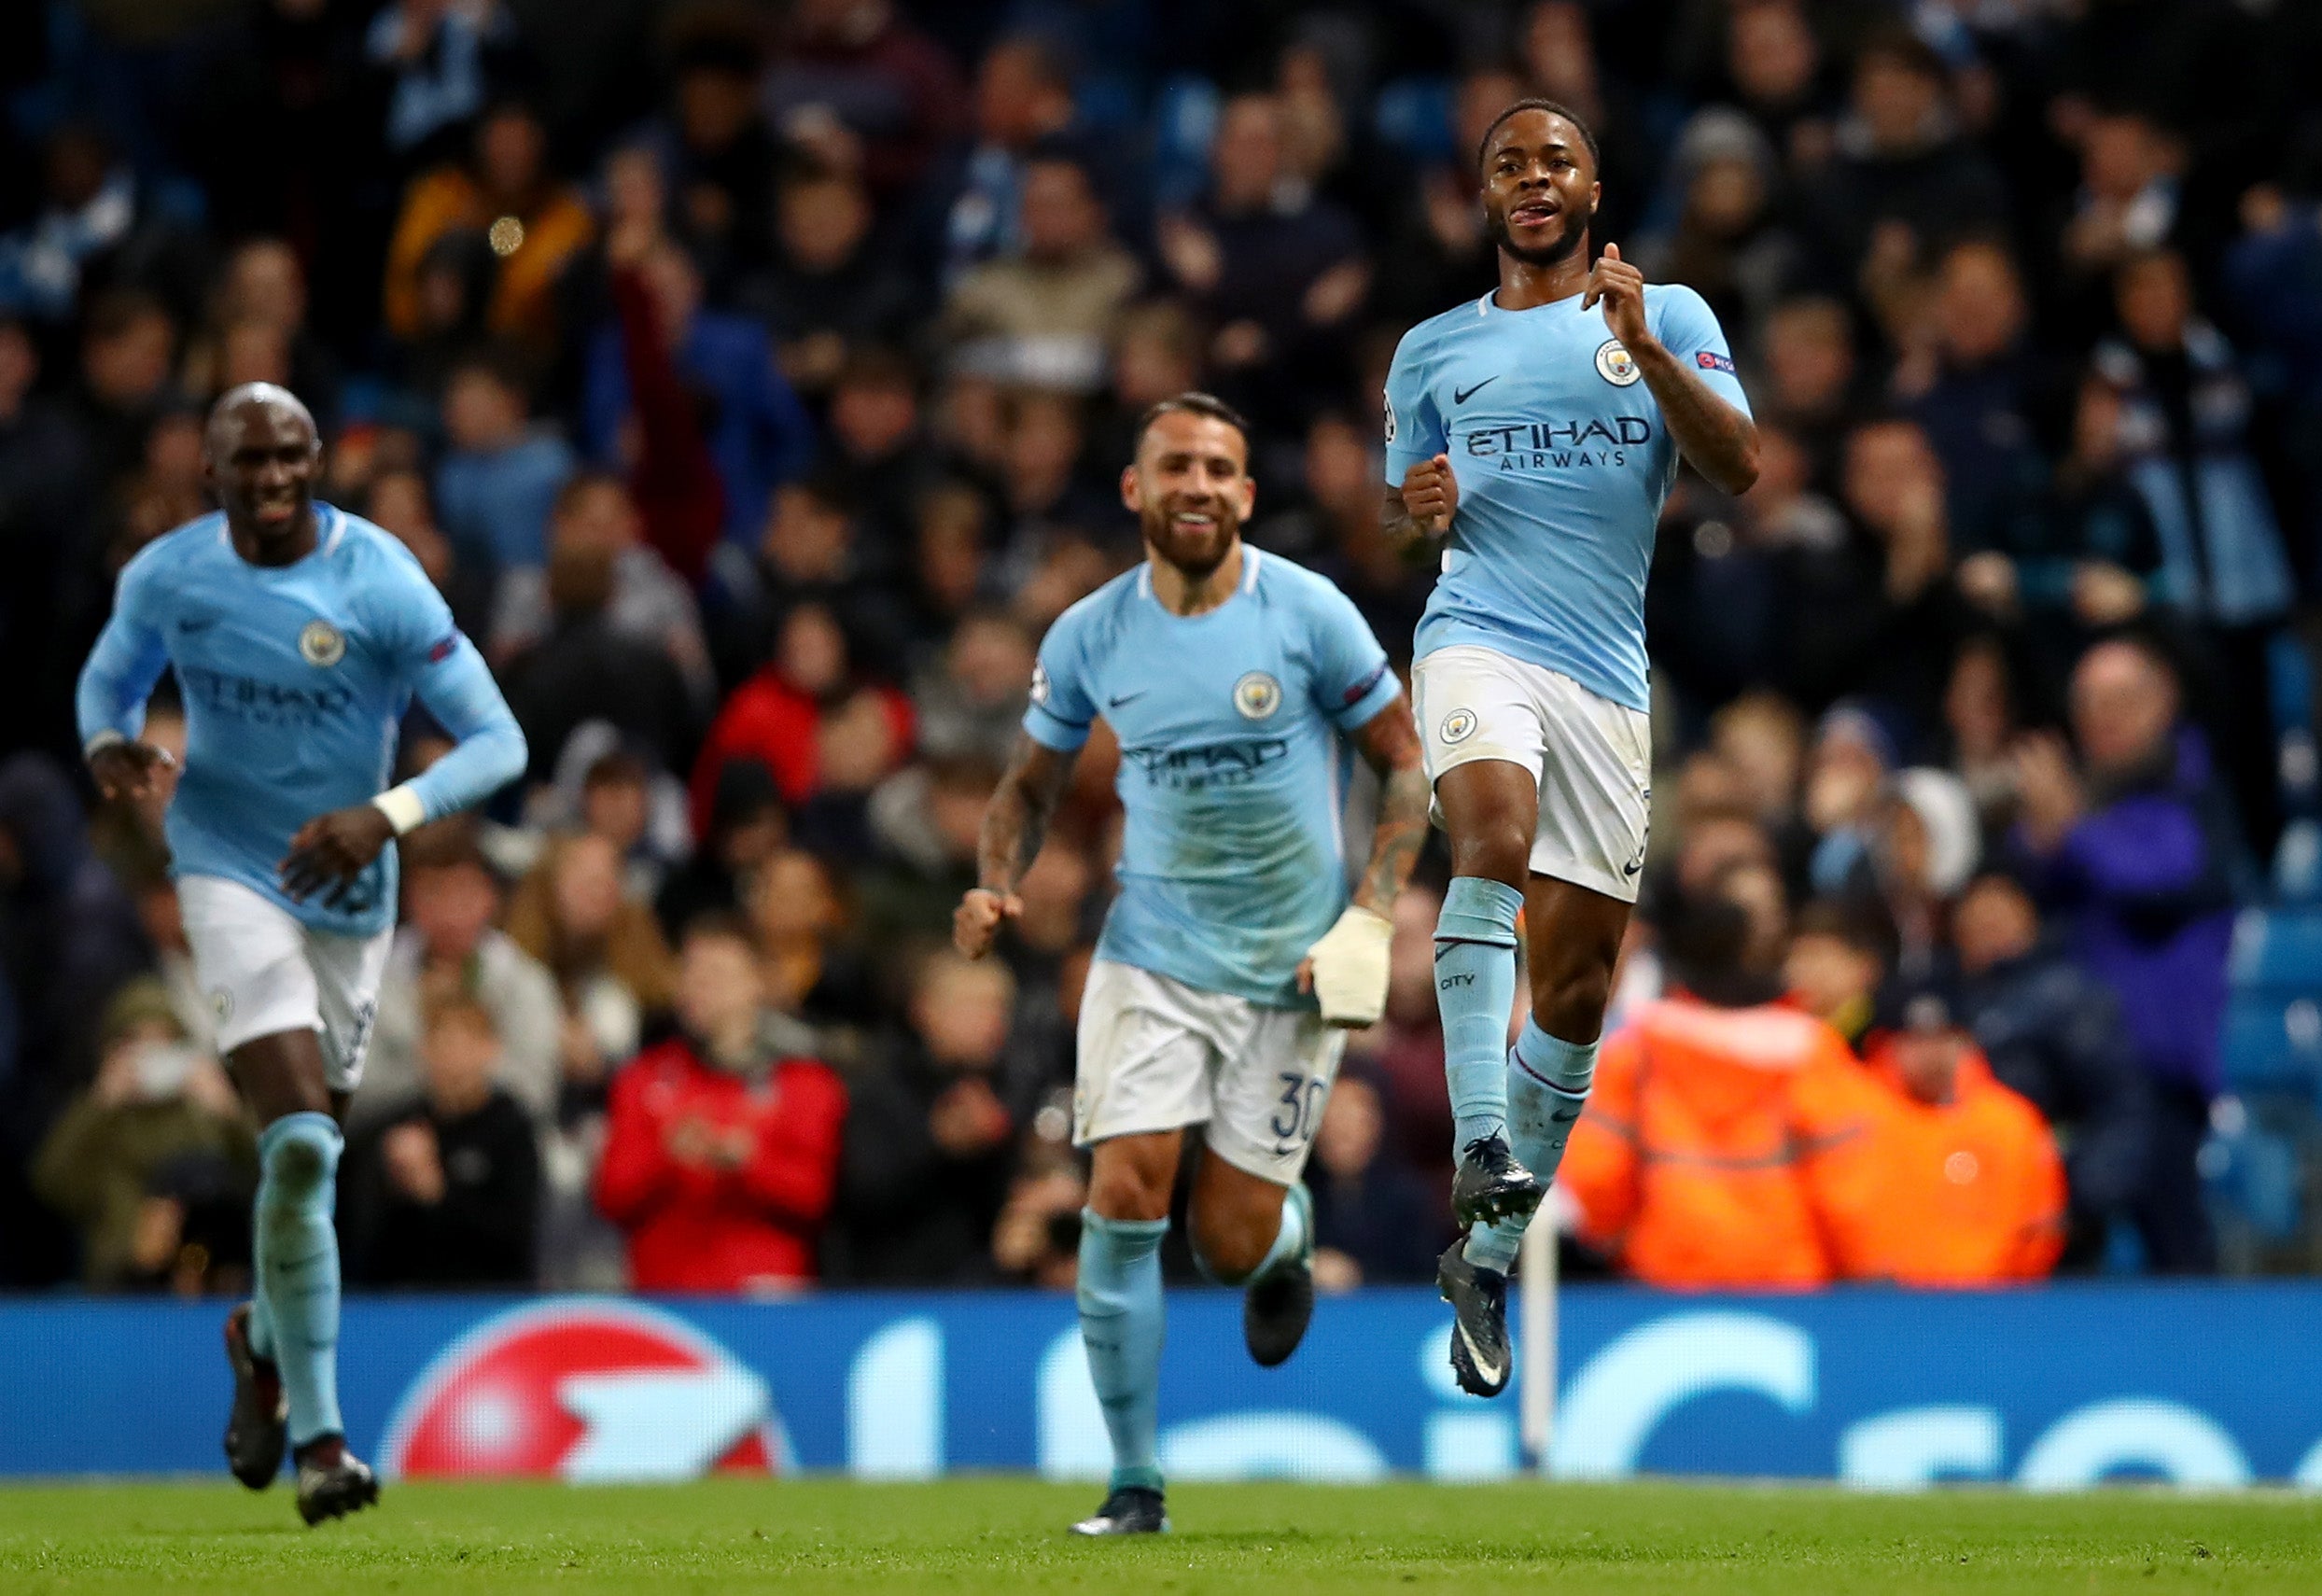 Raheem Sterling celebrates scoring the decisive goal in a tight game